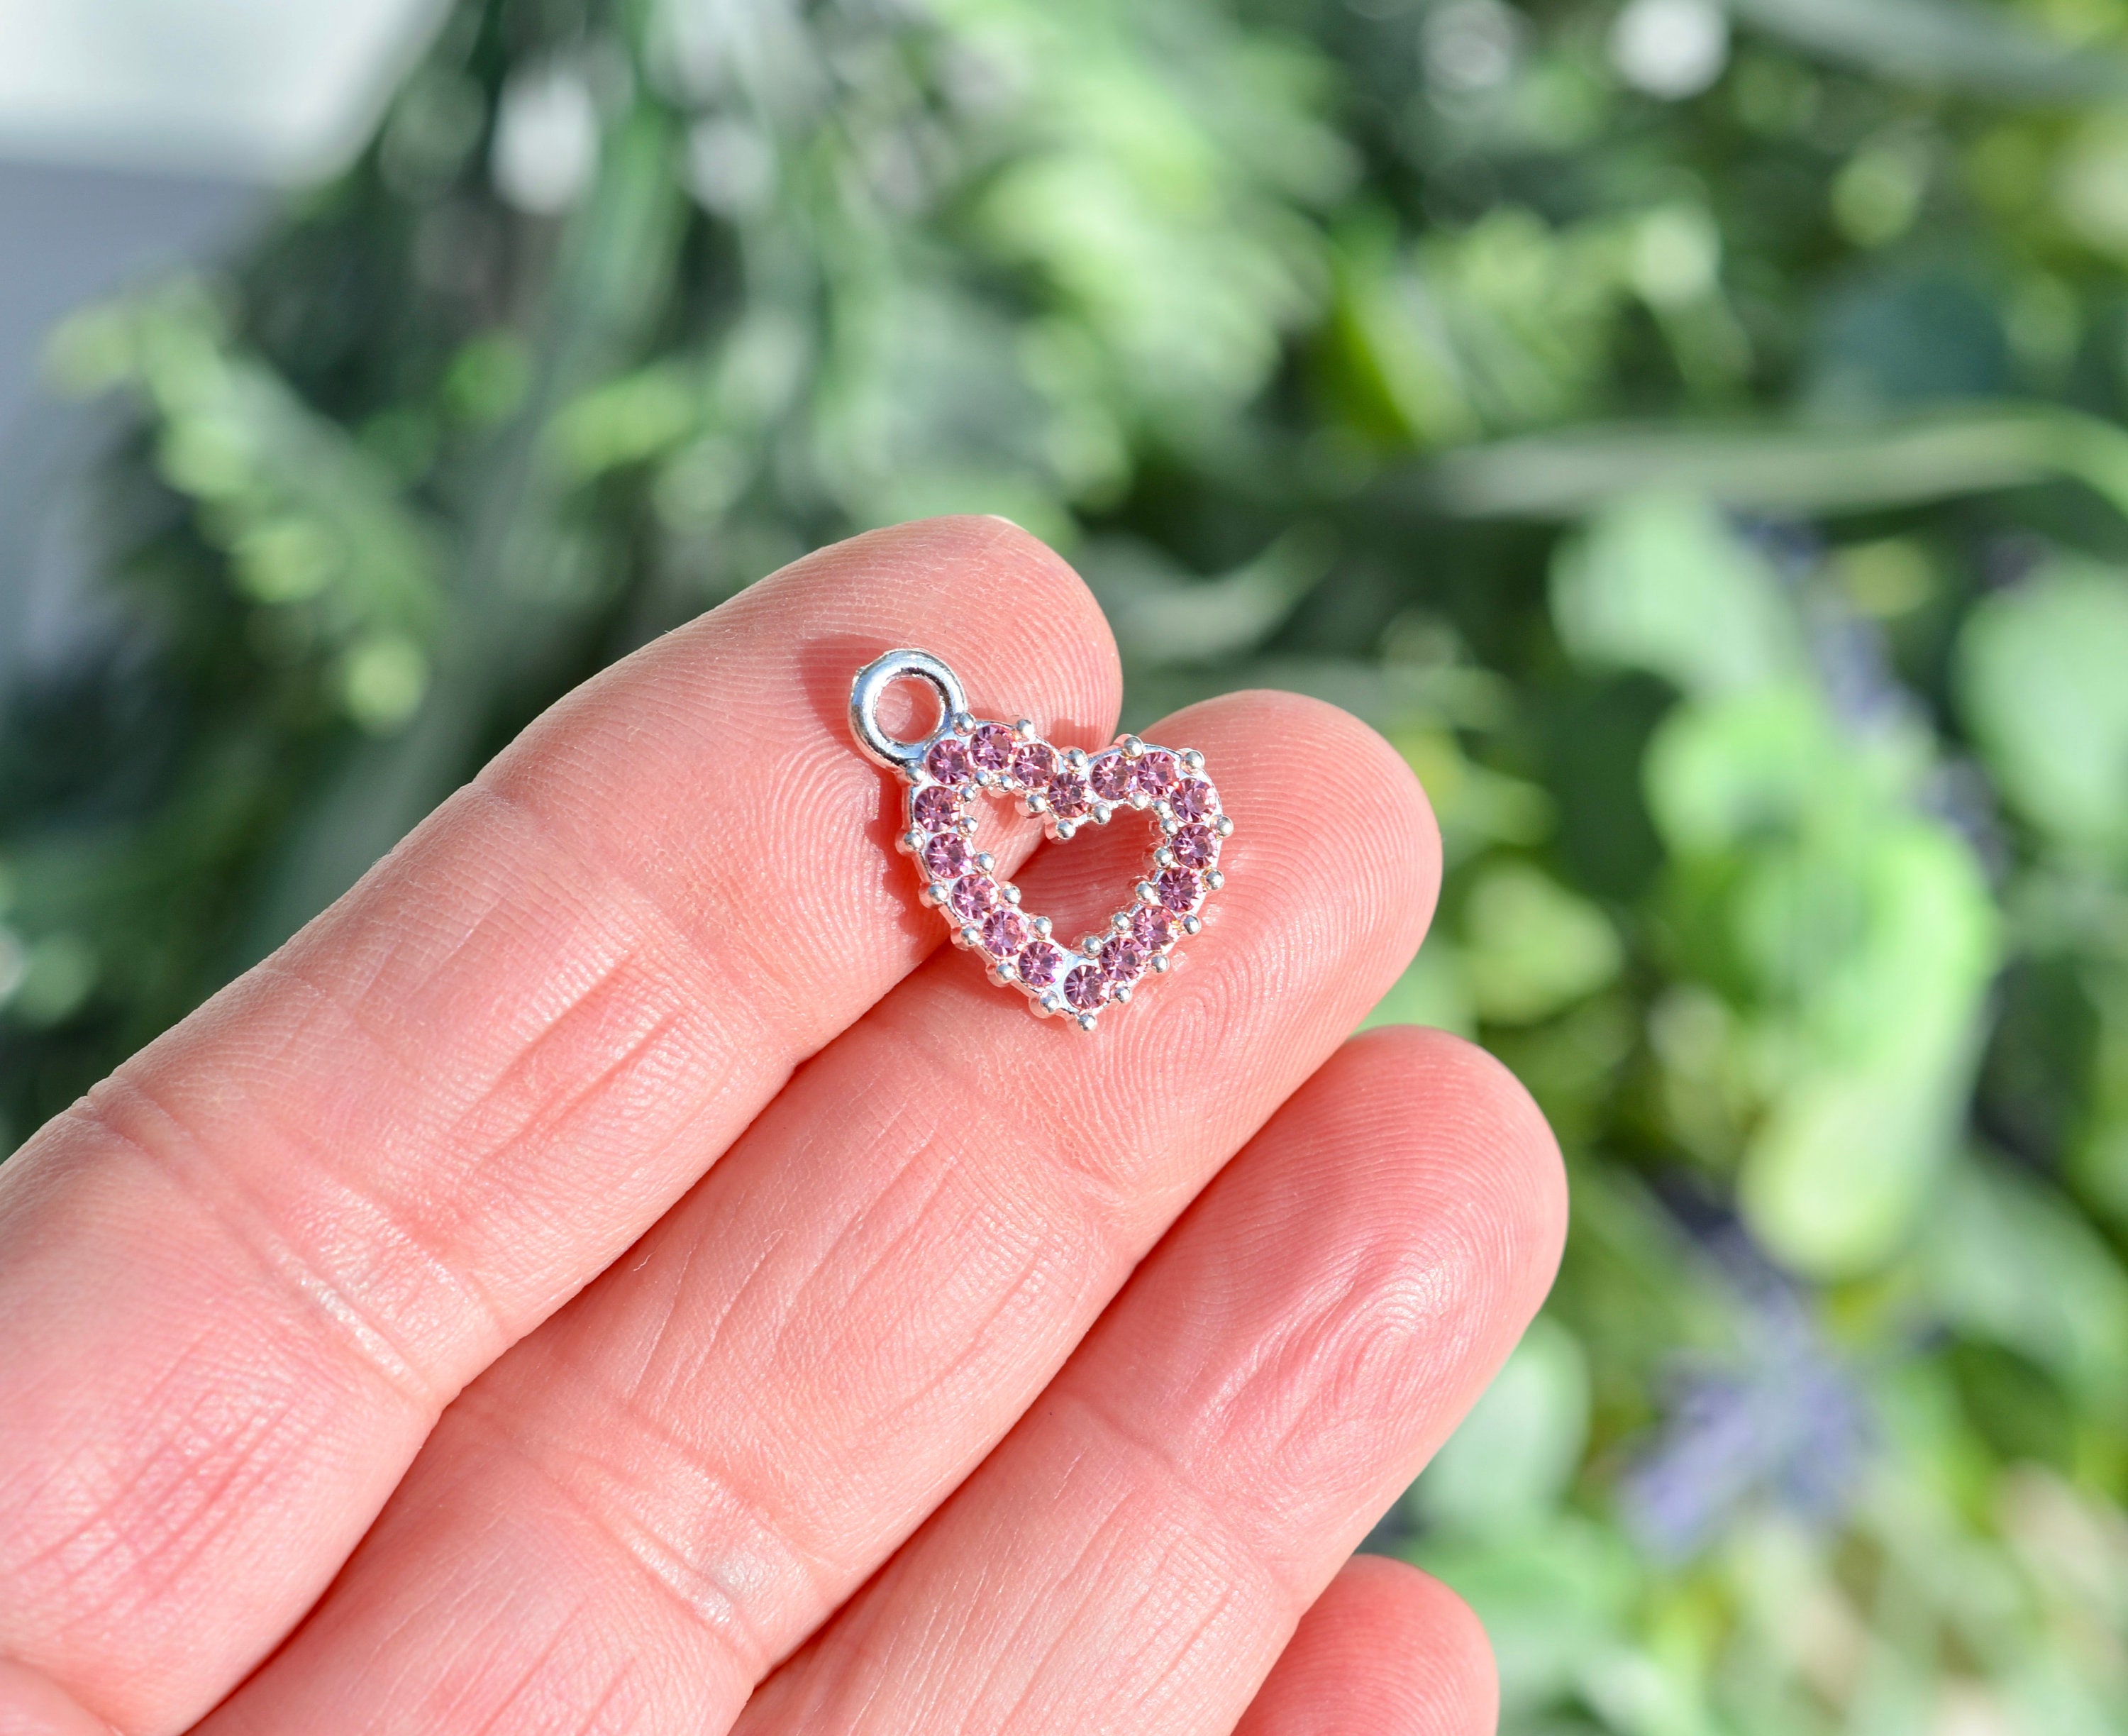 10 PC Heart Shape Charms Bling Charms For Jewelry Making